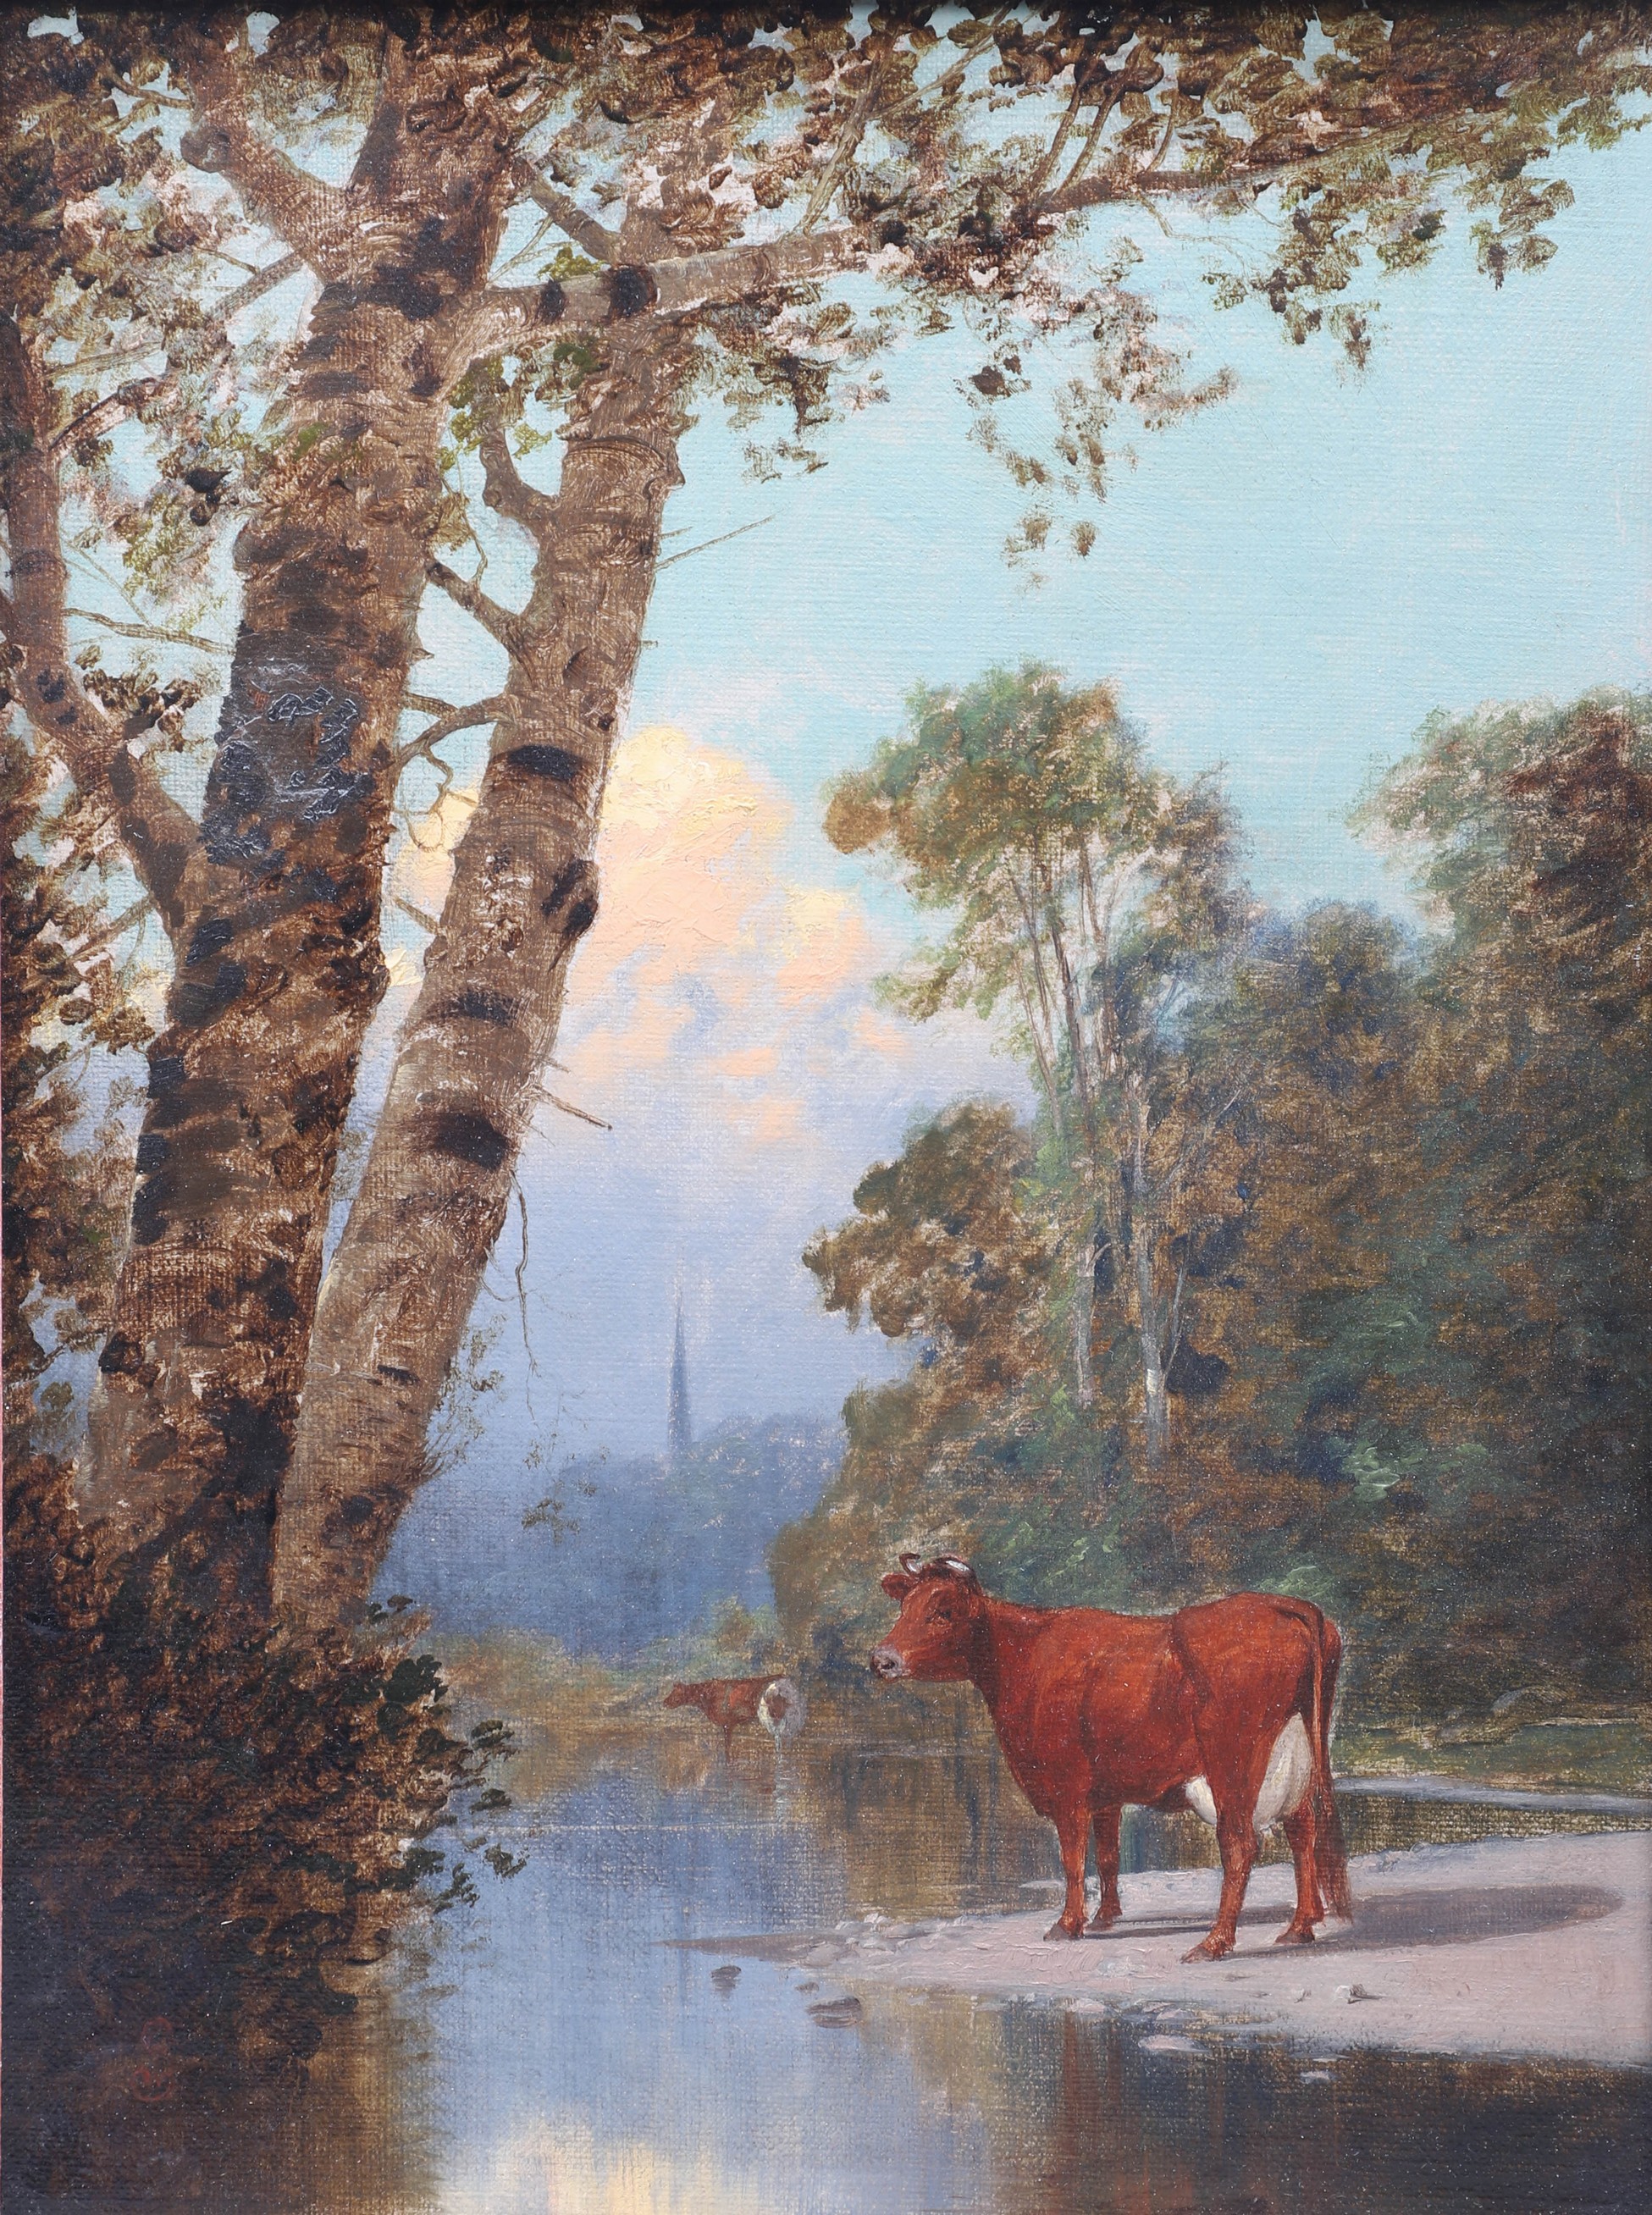 19th c American Landscape Painting 27a5f2